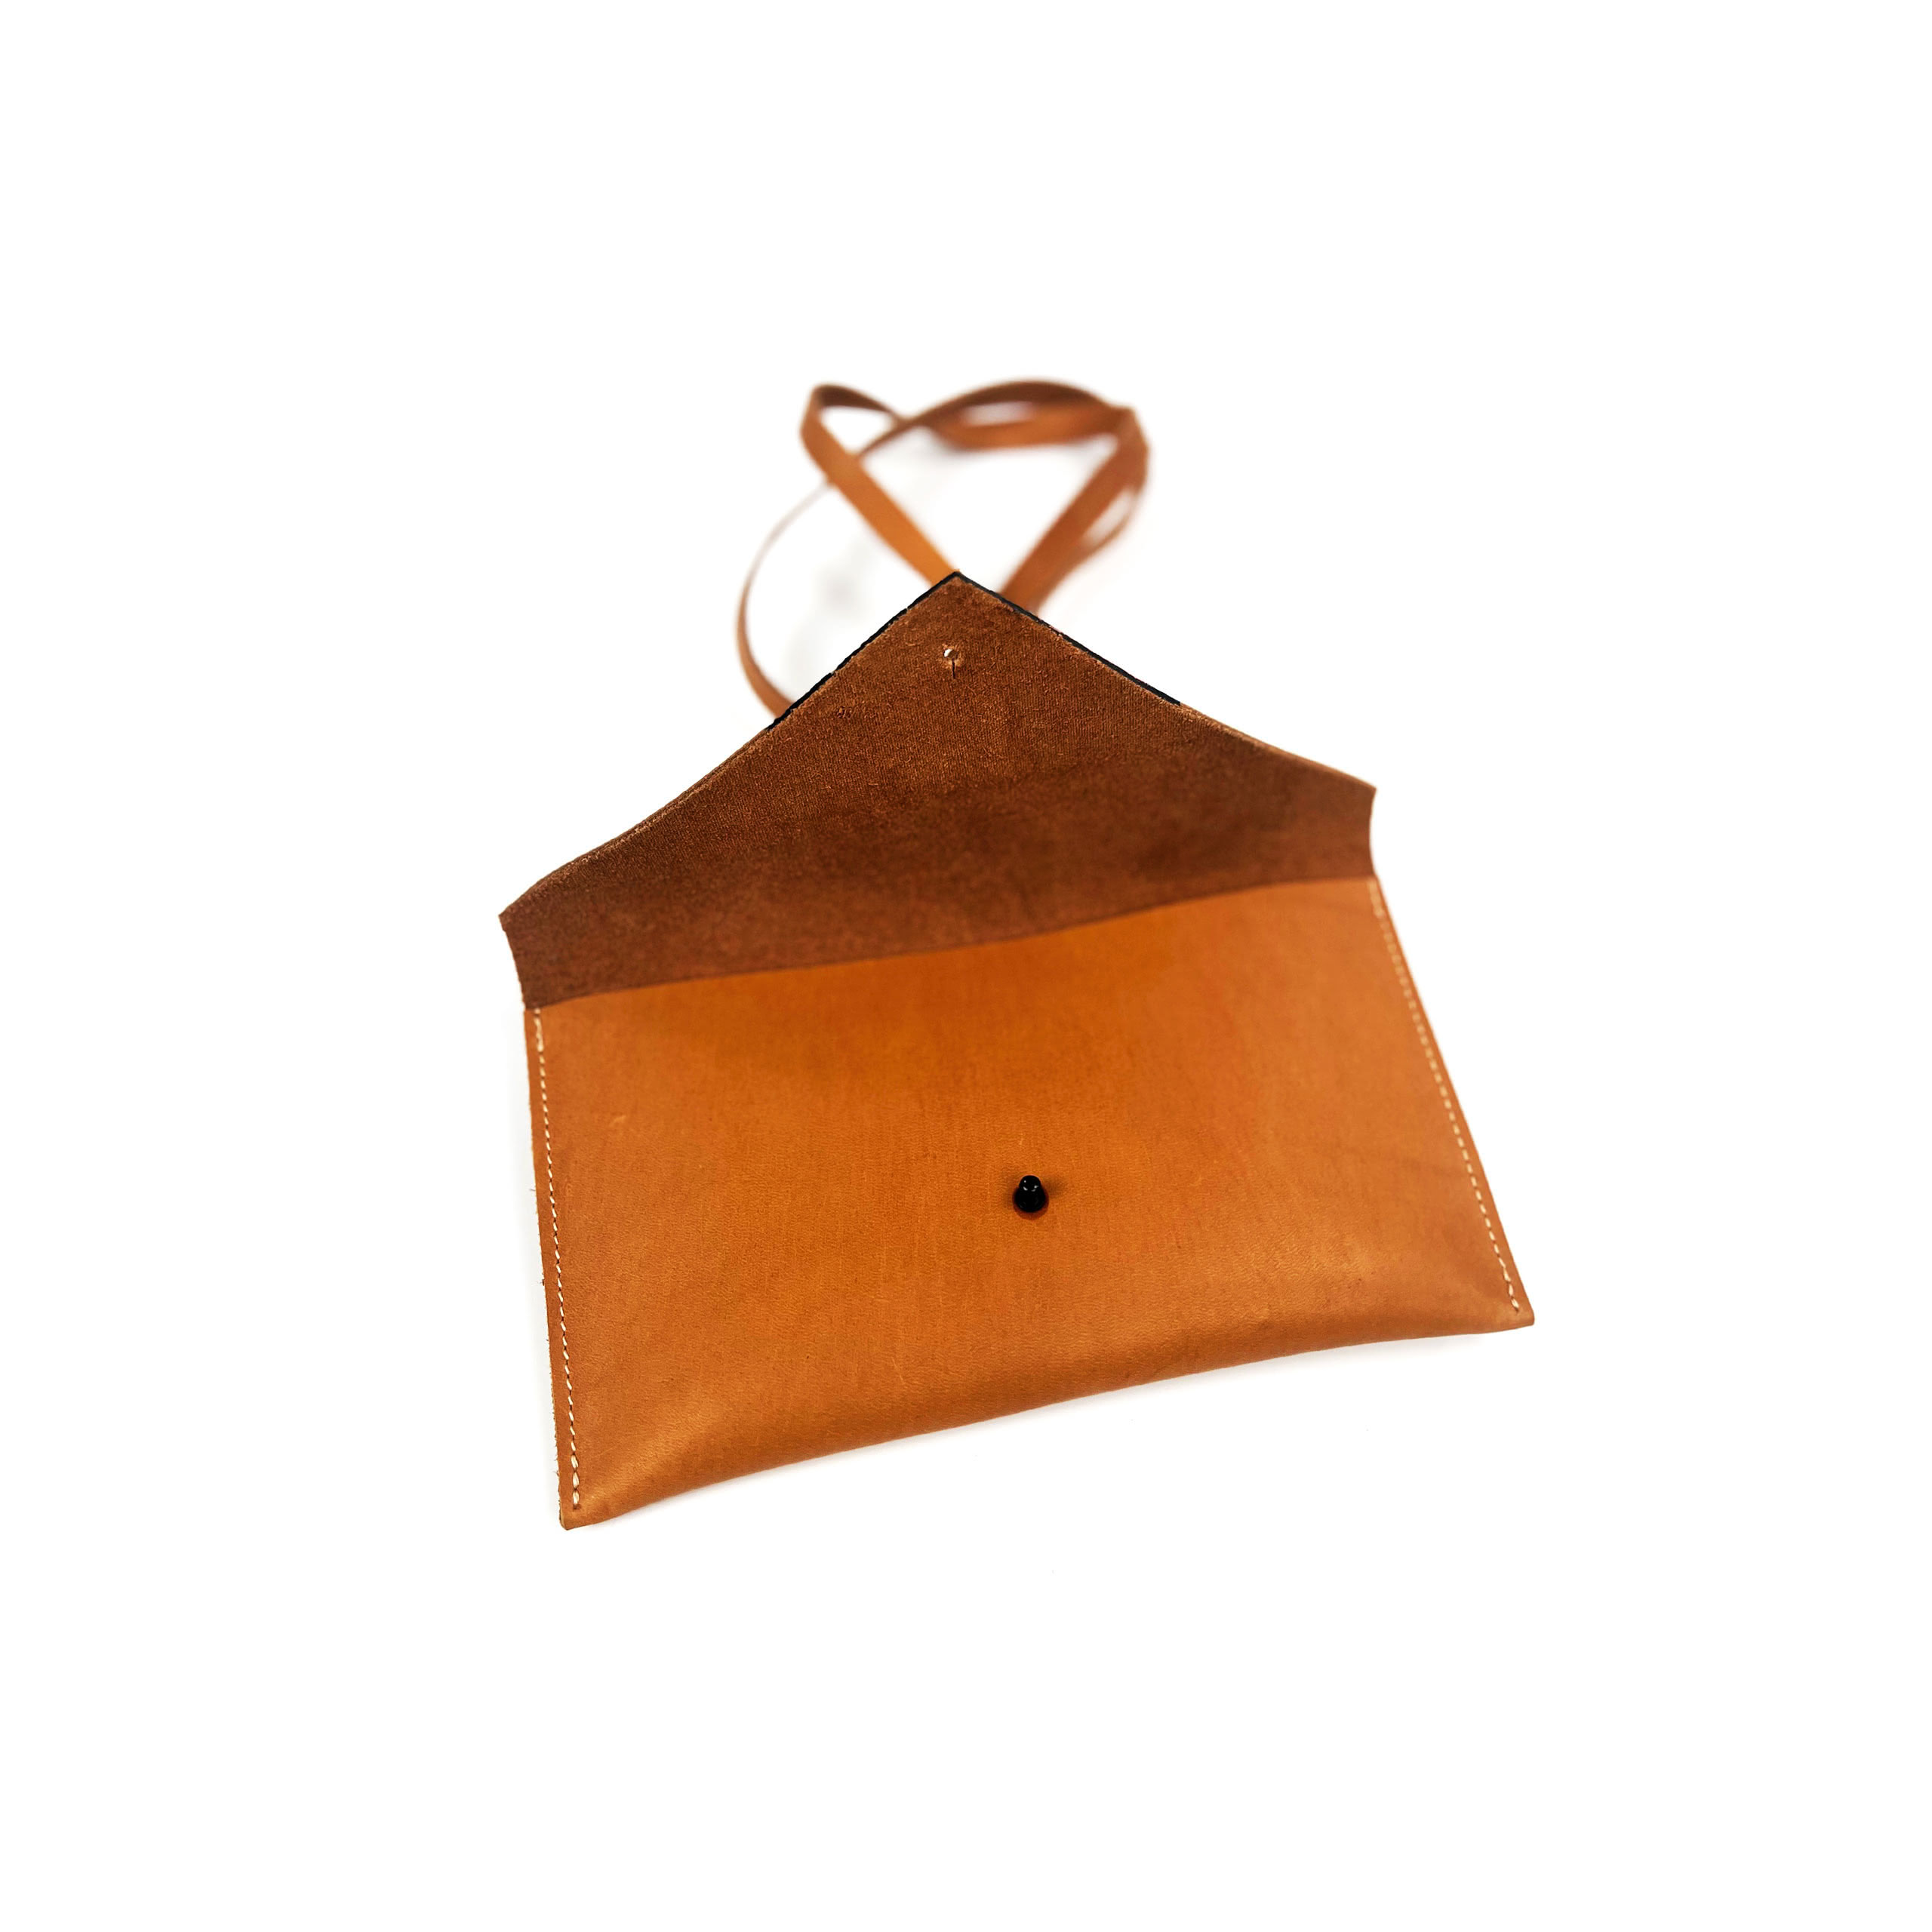 A brown and tan leather shoulder purse as seen from the front, isolated on a white background.